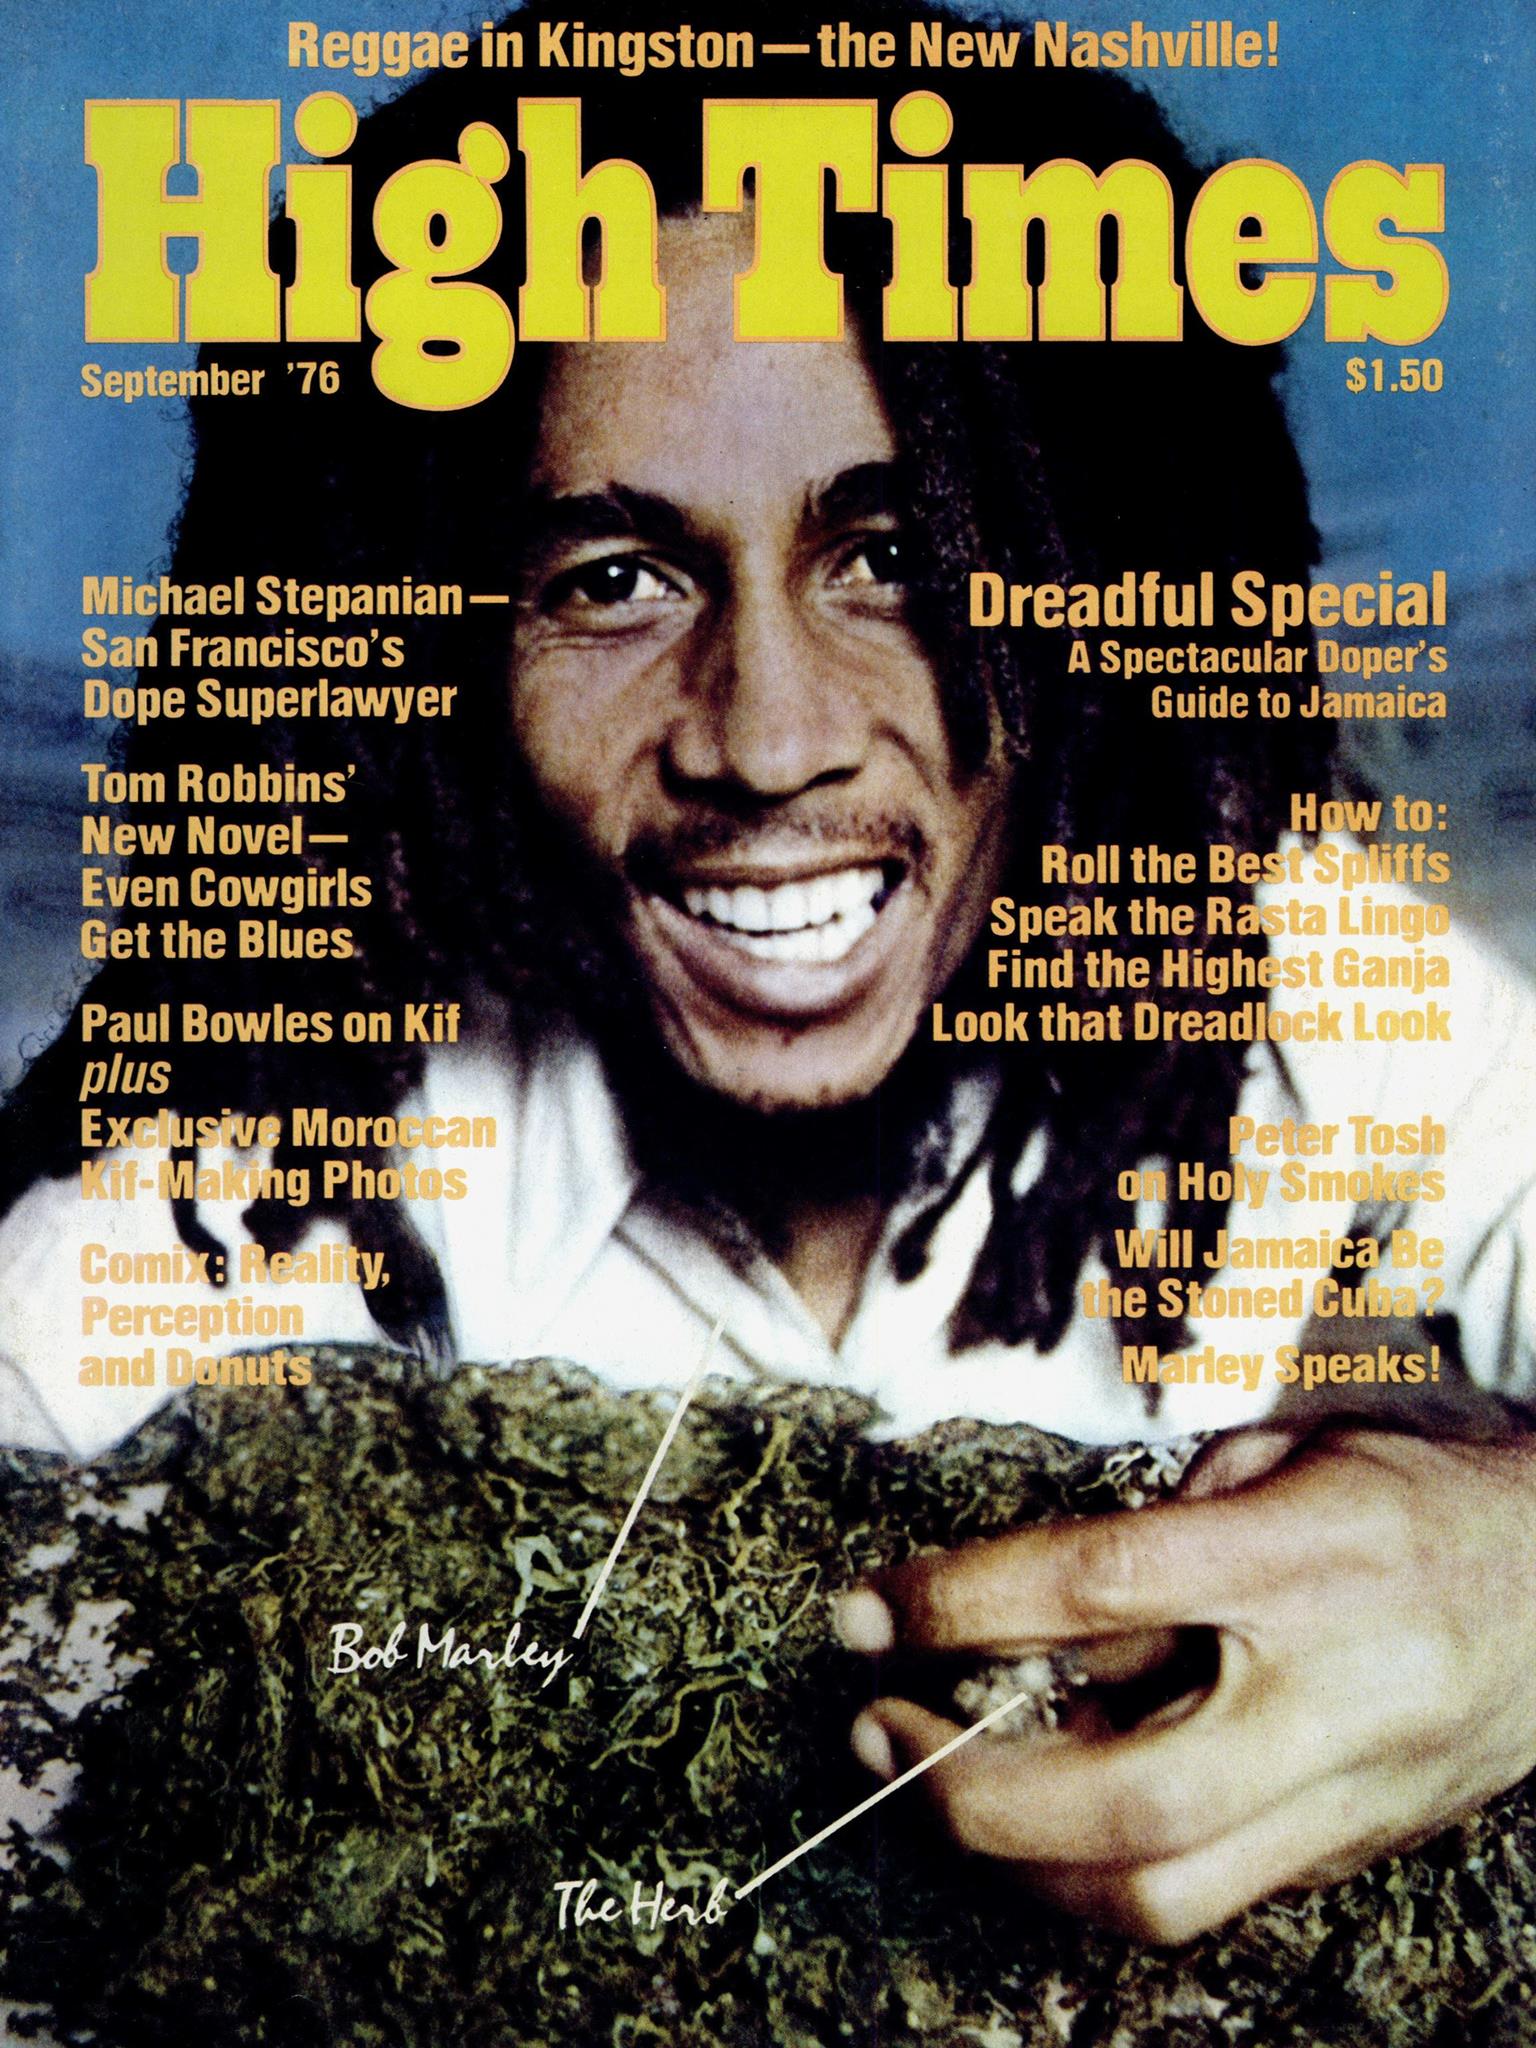 Happy Birthday to the legend - Bob Marley. High Times. September 1976. 